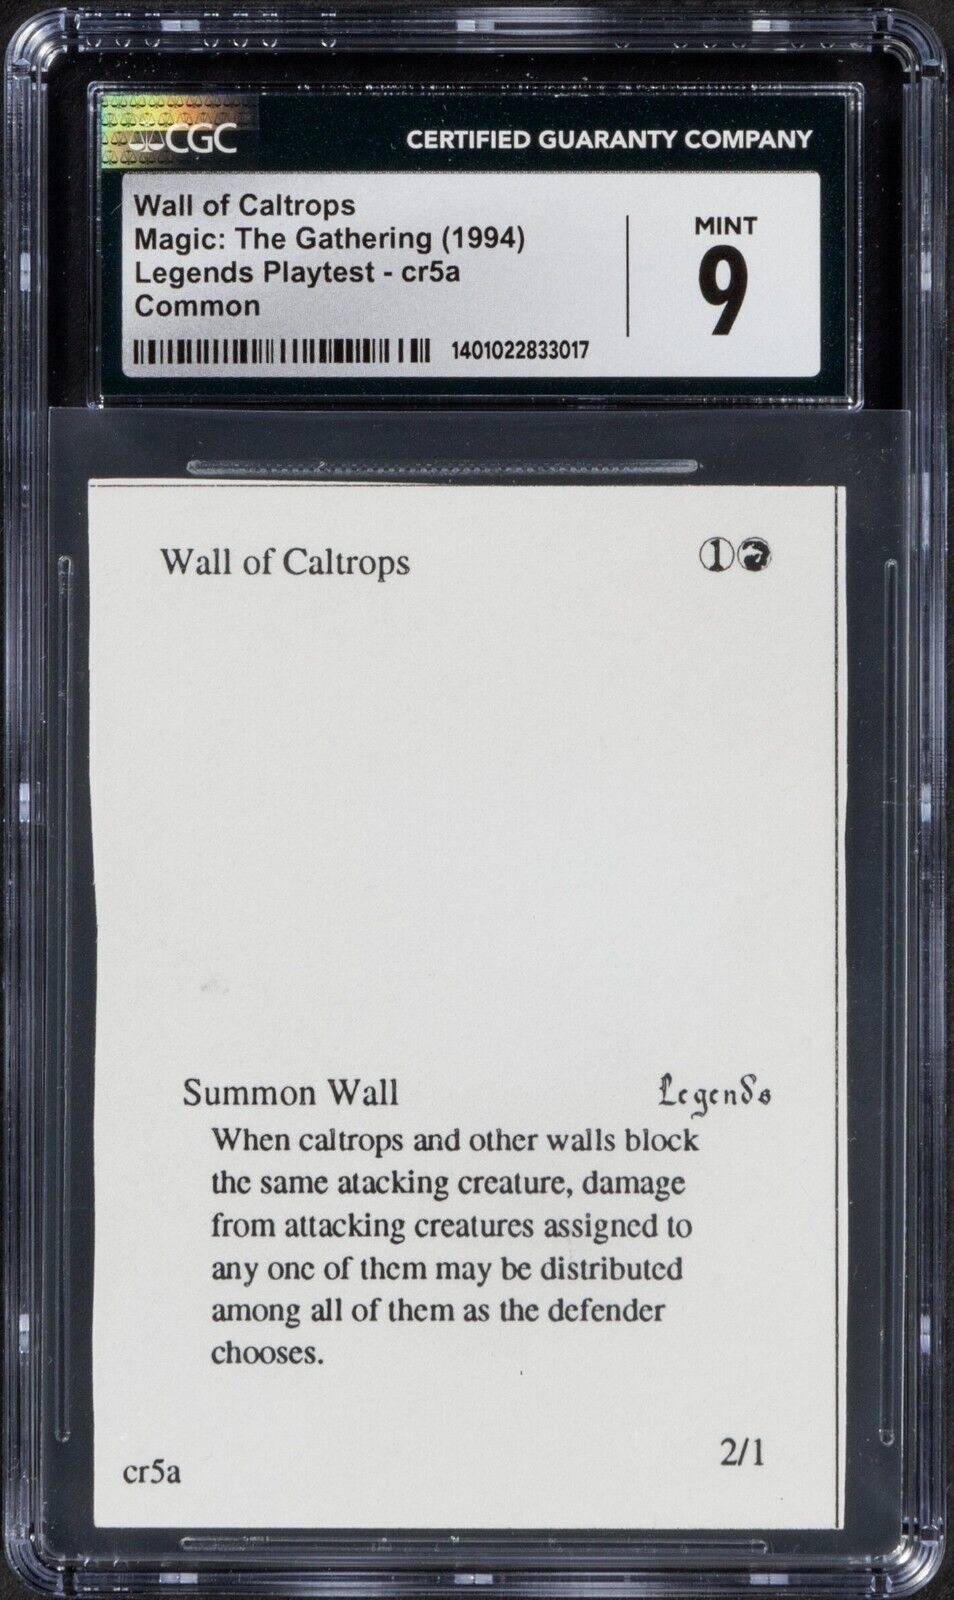 1994 Magic: The Gathering MTG Wall of Caltrops Legends Playtest Card CGC 9